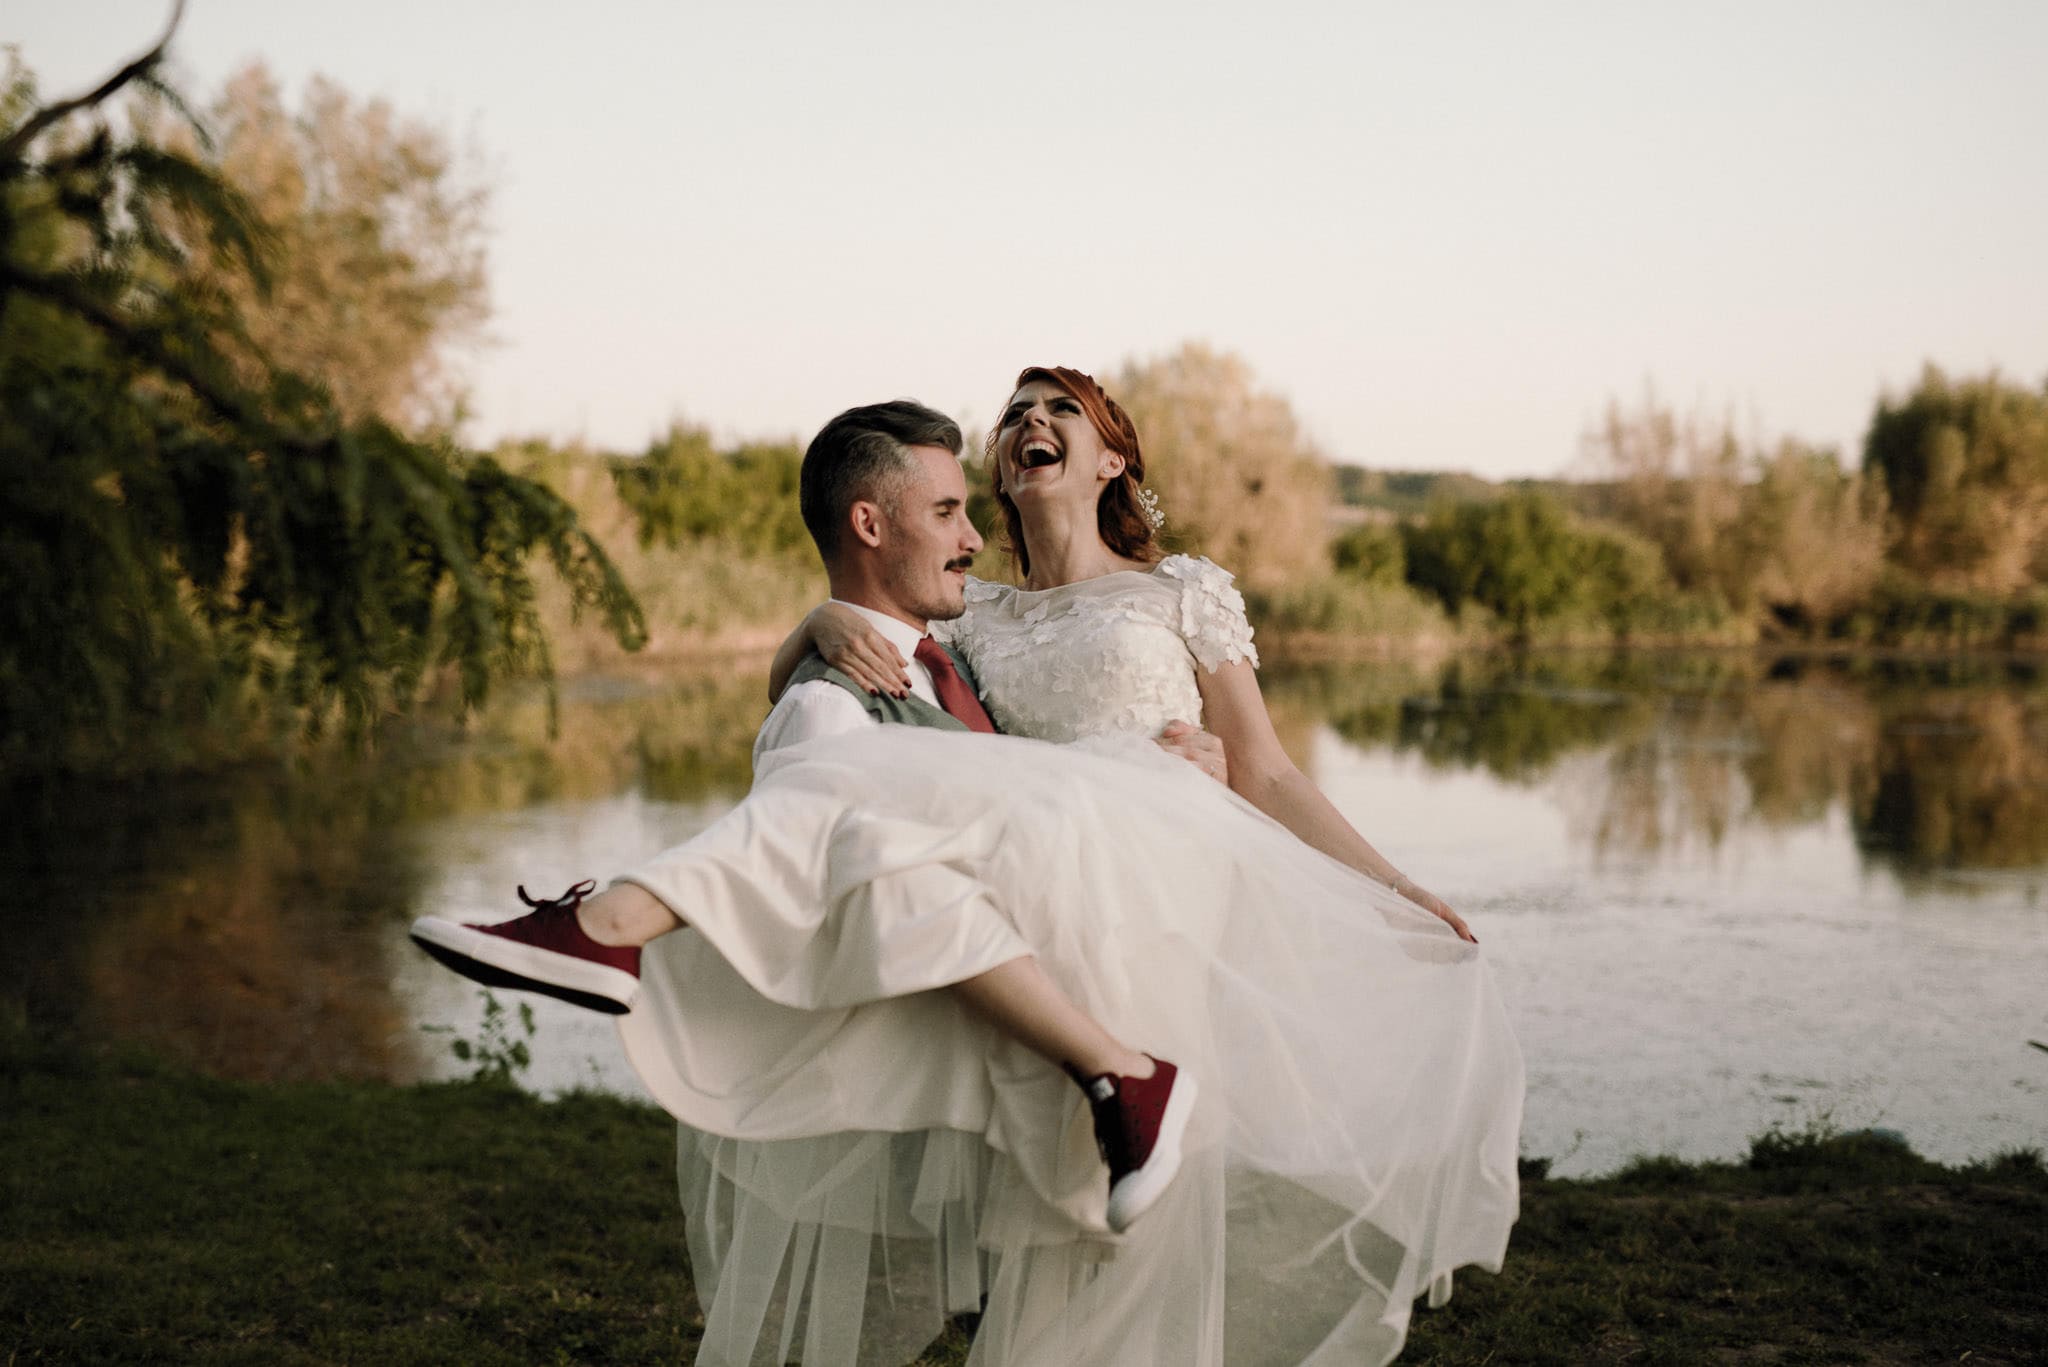 newlyweds having fun after their autumn wedding ceremony